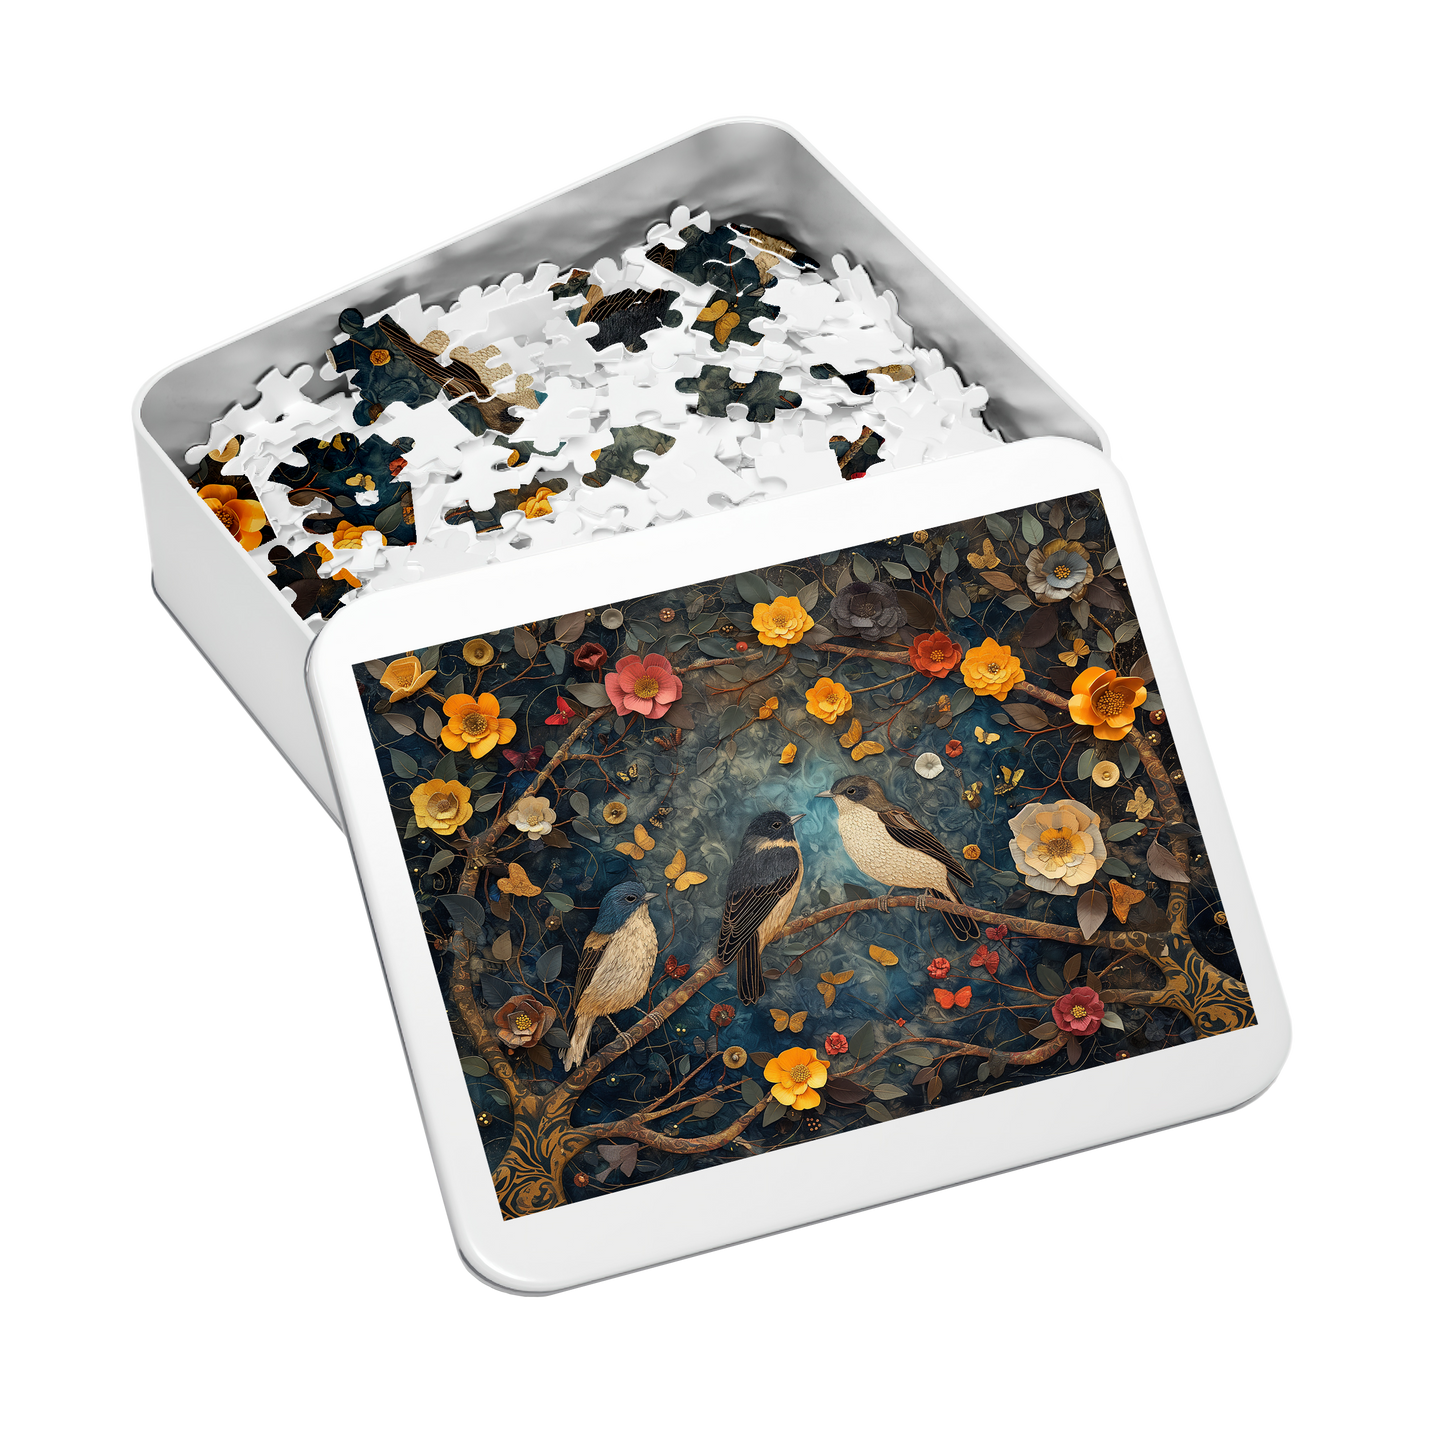 Petals and Plumage 02 - Premium Jigsaw Puzzle, Ornate, Fantasy - Multiple Sizes Available